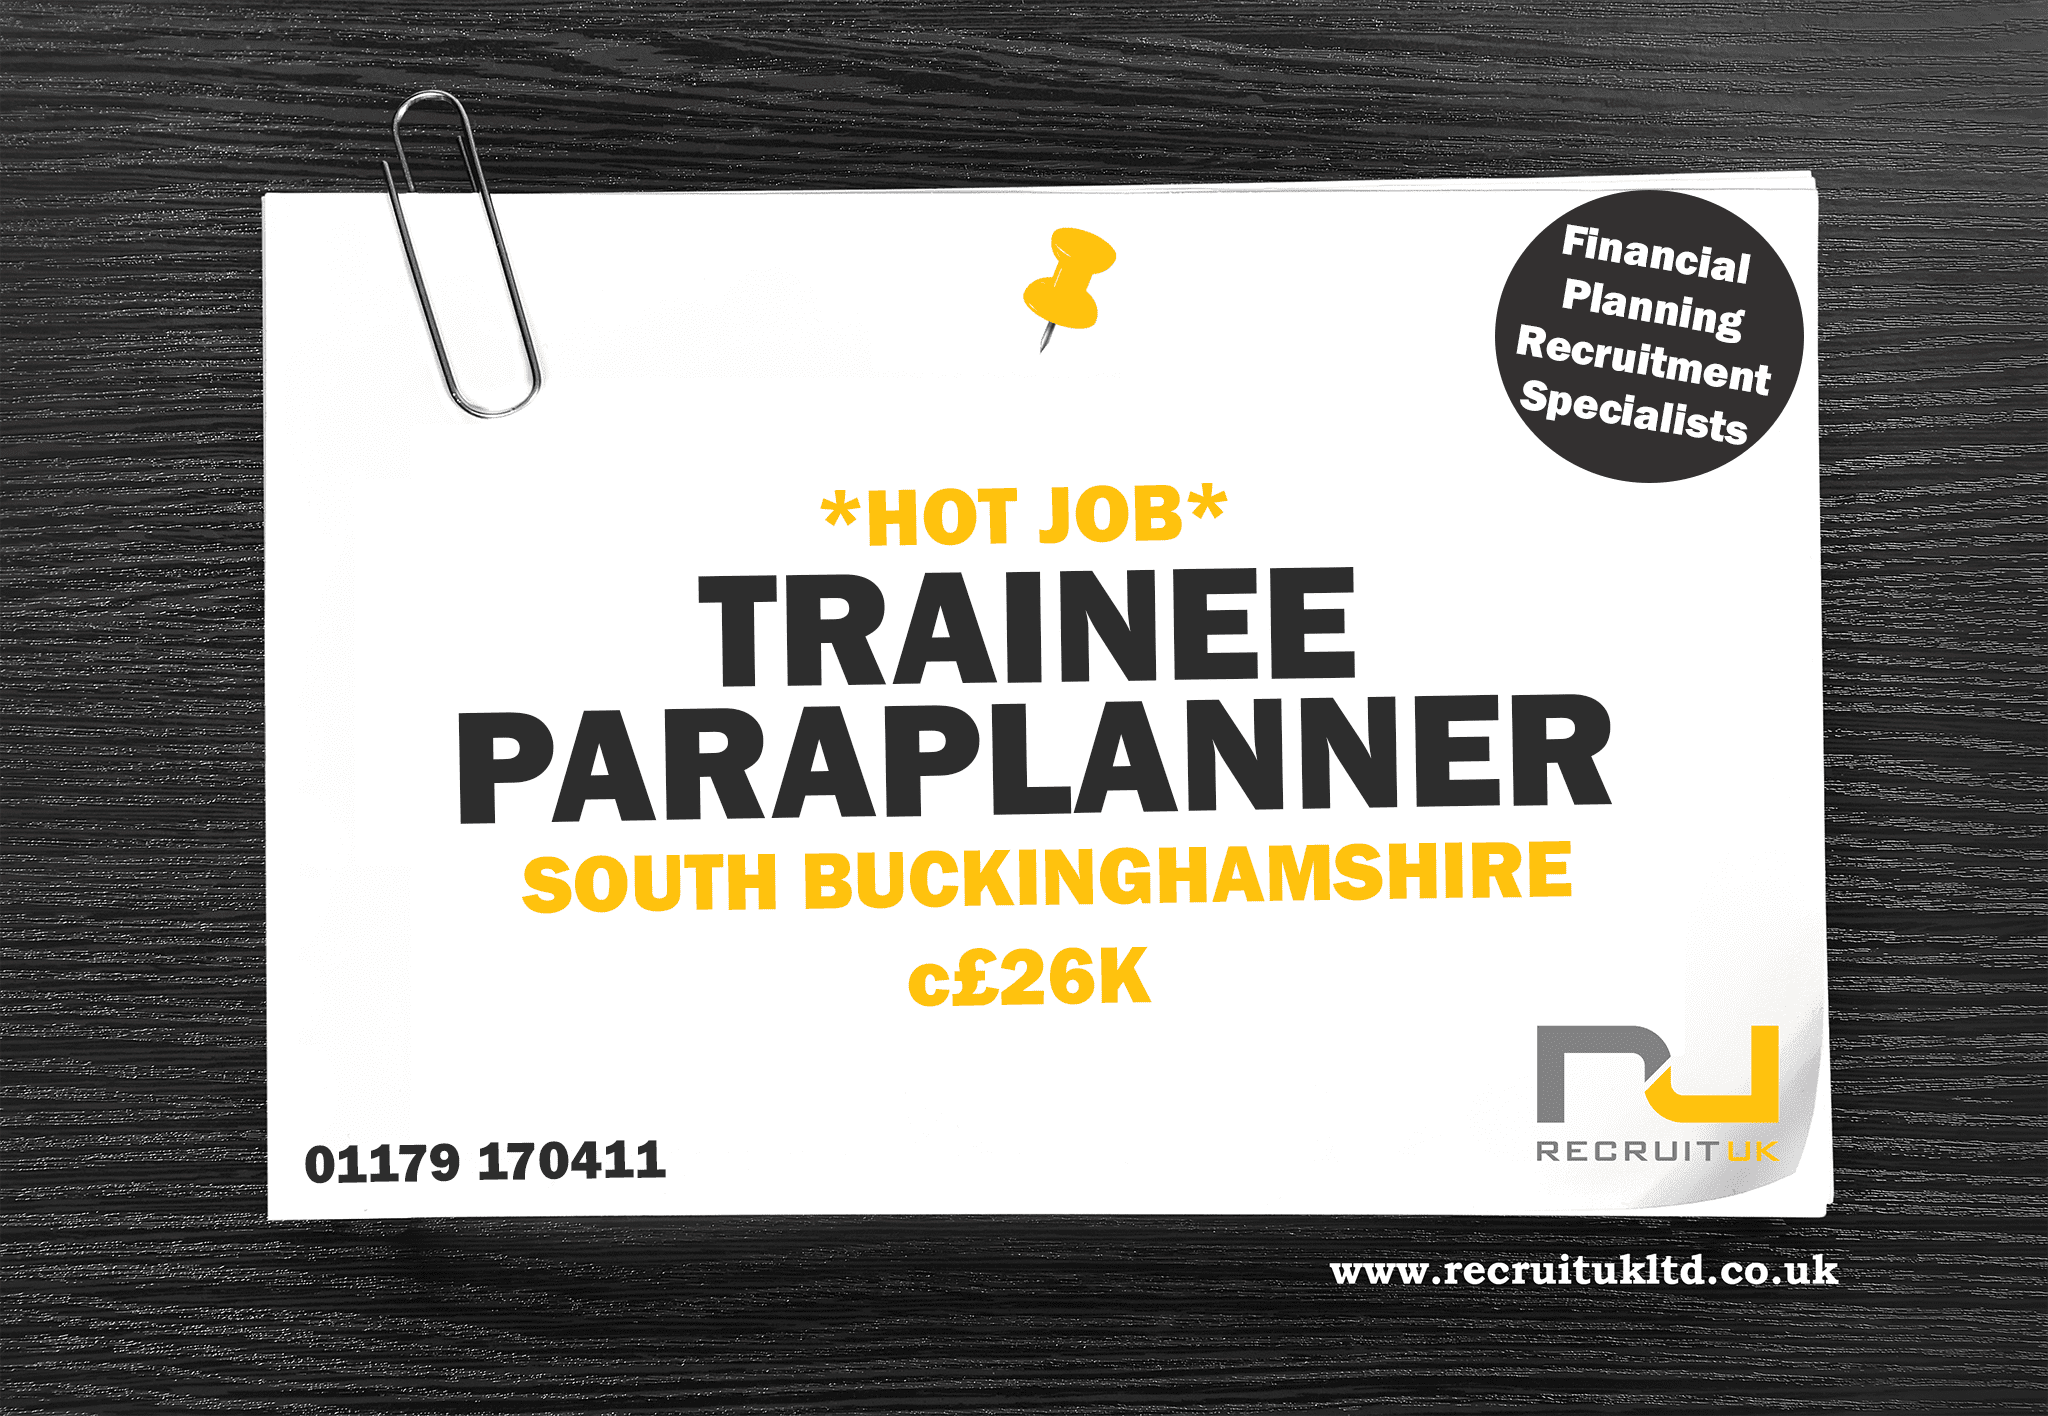 Trainee Paraplanner - South Buckinghamshire